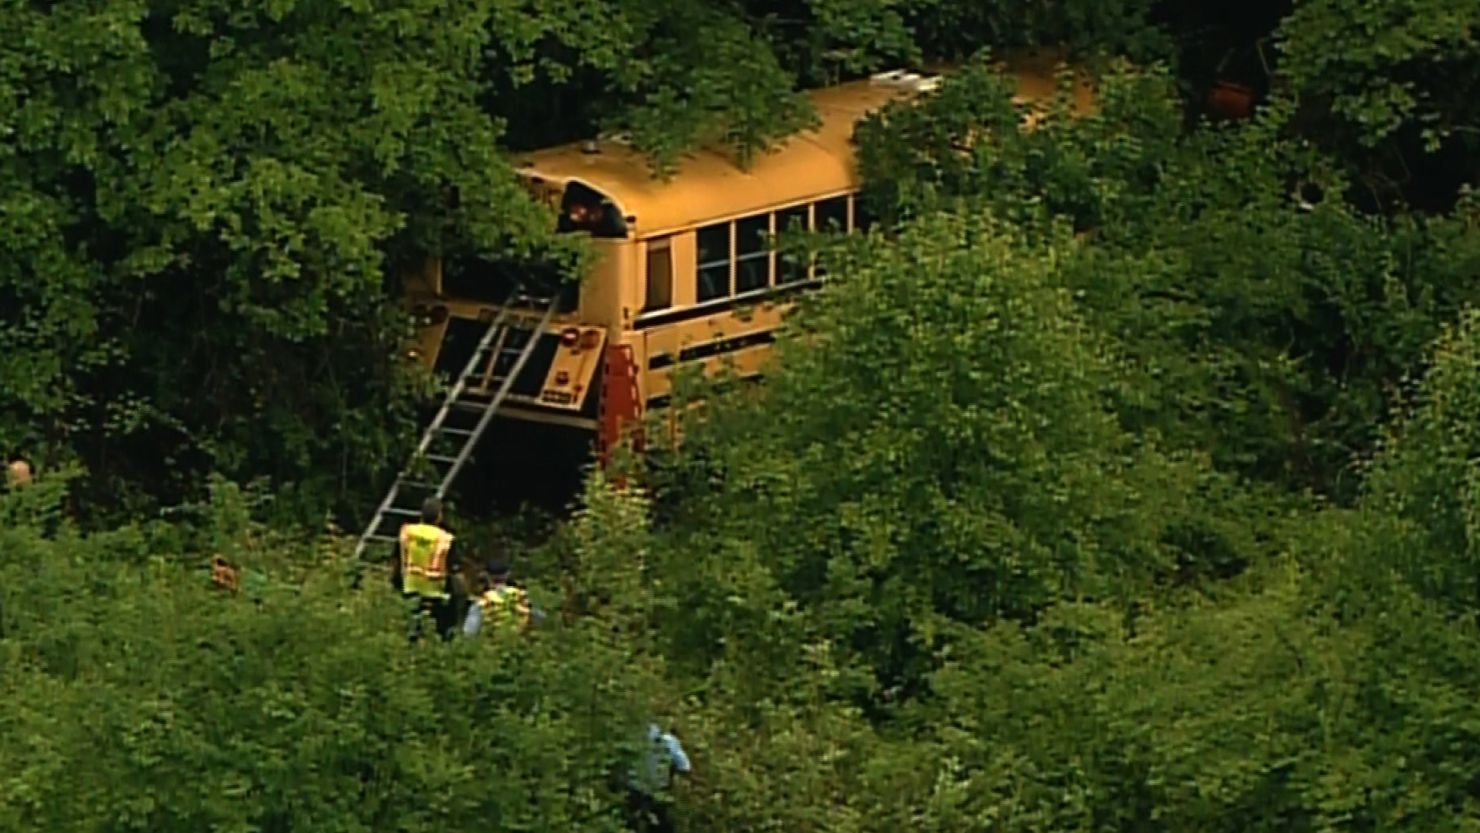 A school bus veers off I-44 near St. Louis on Thursday to avoid a careening car, officials say.